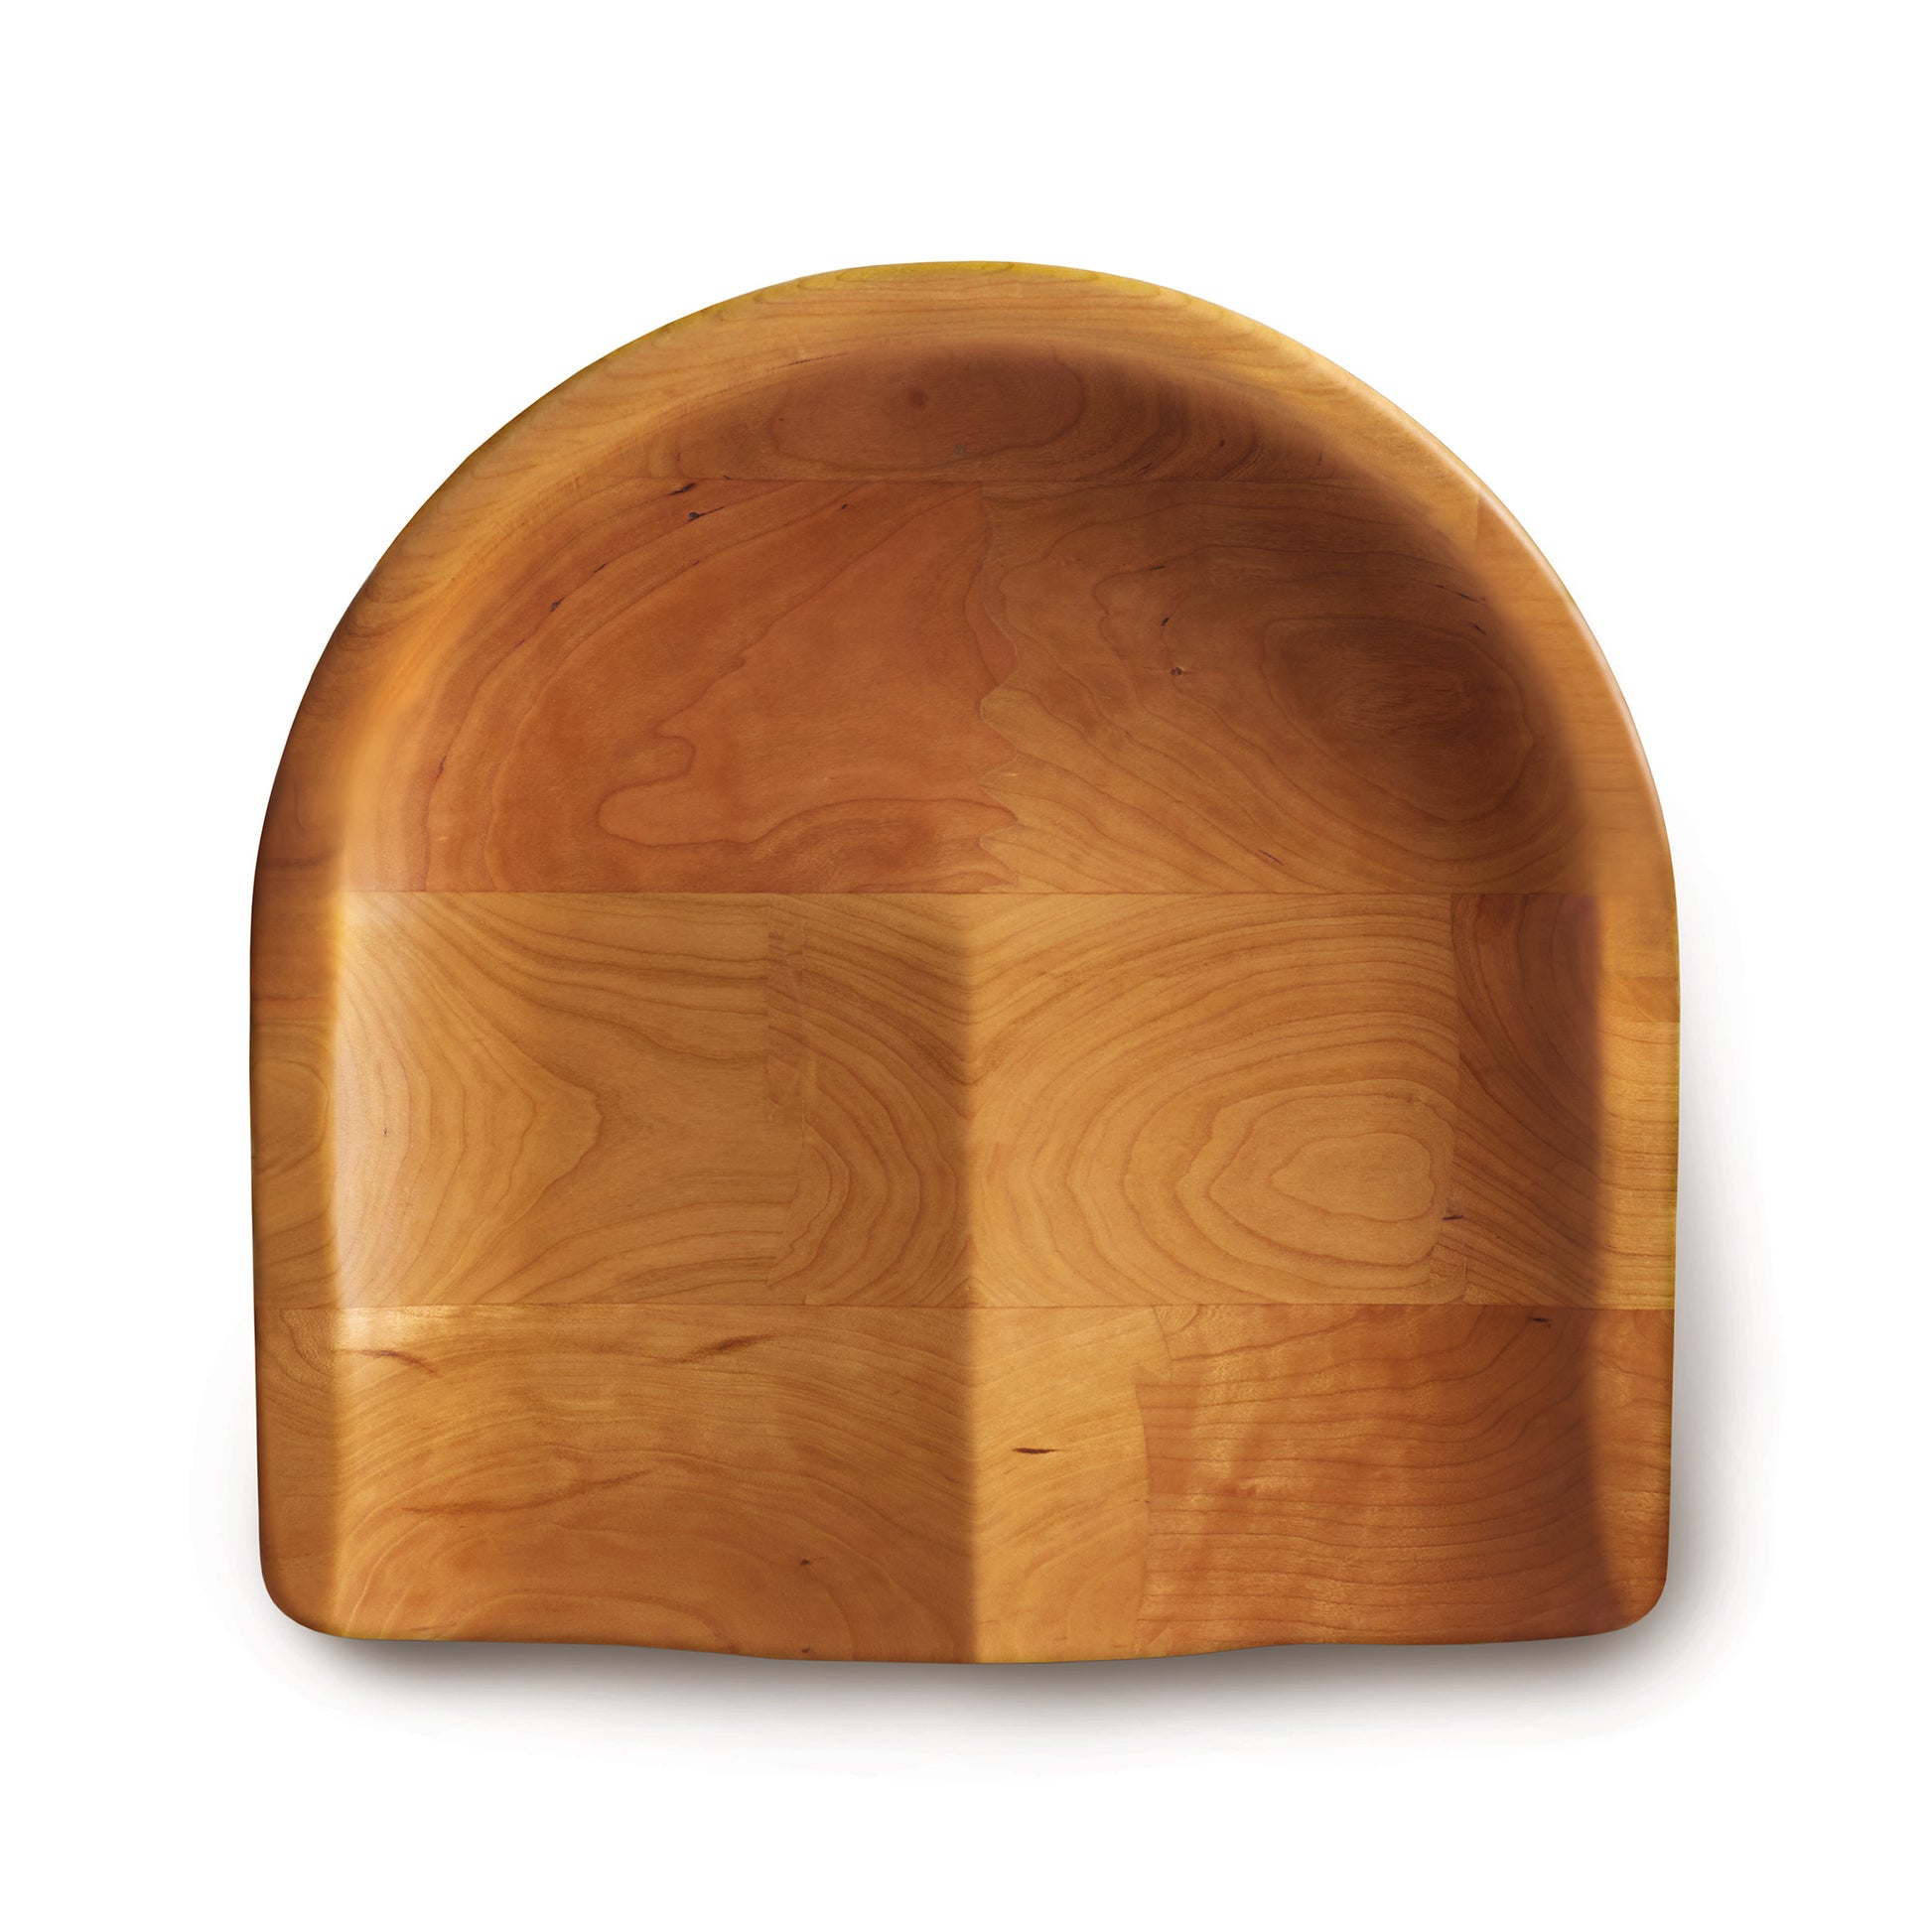 A Modern Farmhouse Tractor Seat Chair from Copeland Furniture with a curved top and a natural wood grain pattern, isolated on a white background, showcasing a contemporary style.